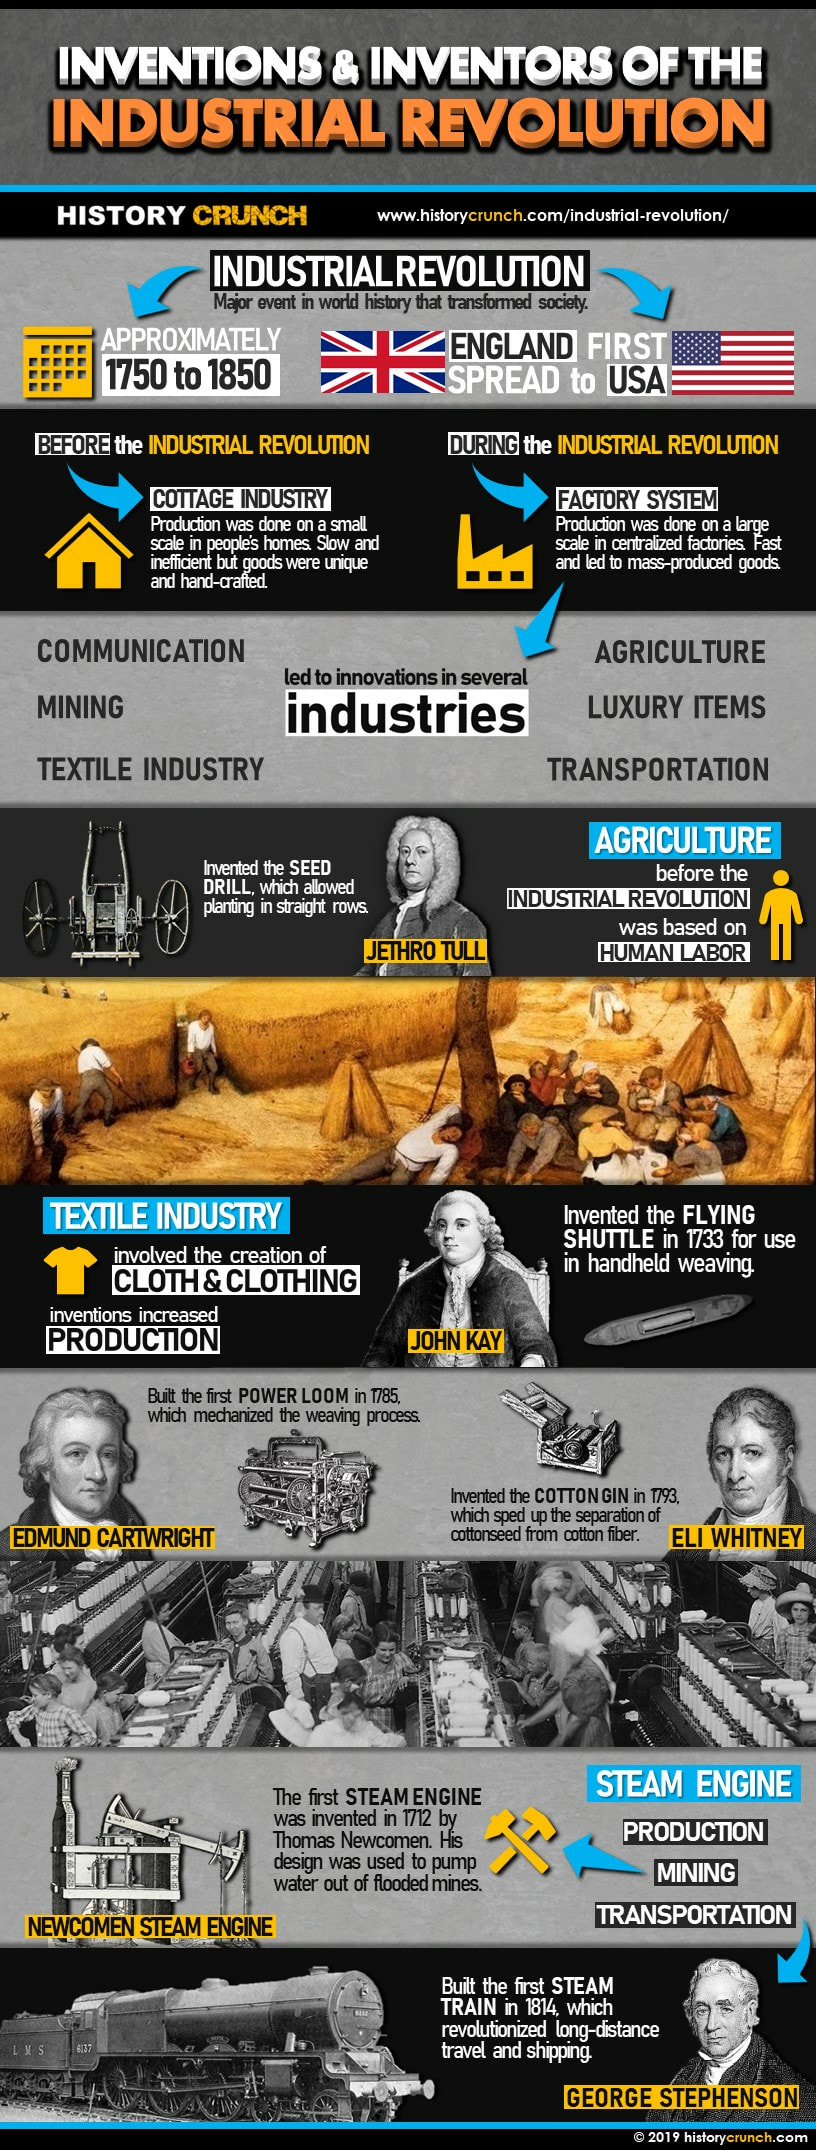 Inventions and Inventors of the Industrial Revolution Infographic